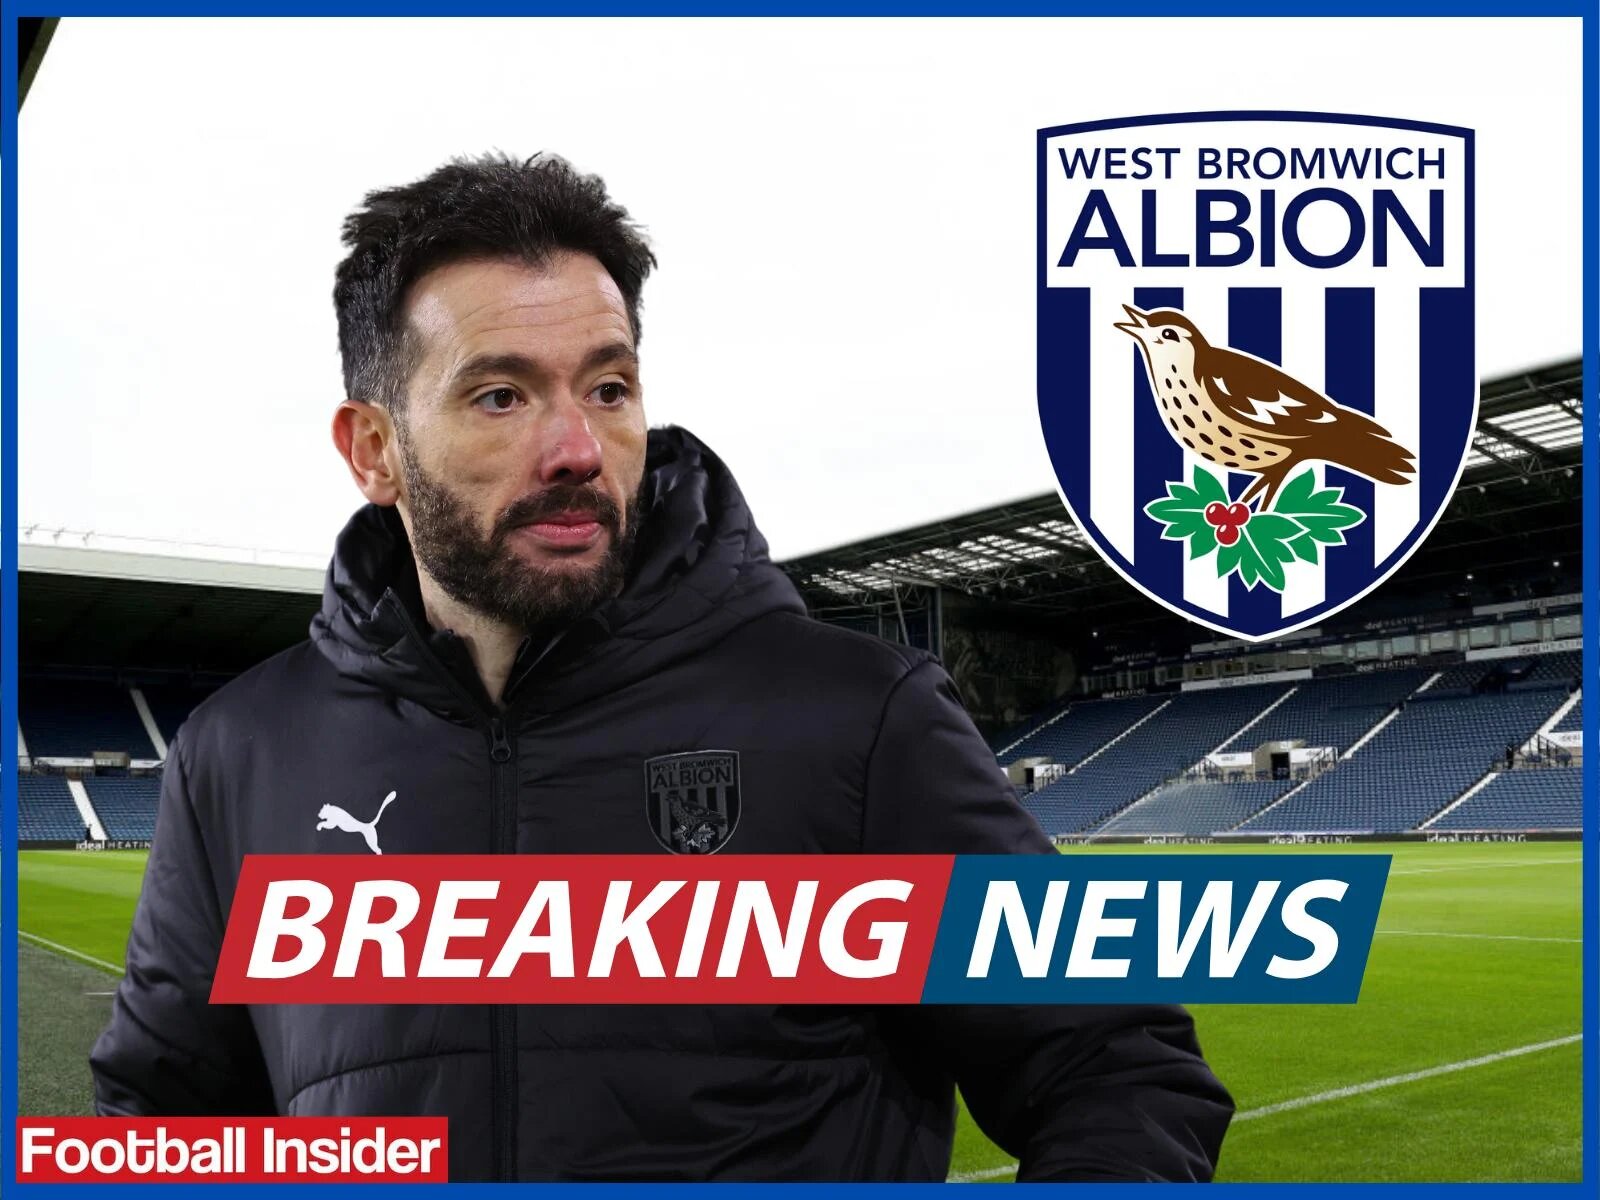 Agree deal: Talented star agree terms to join west brom